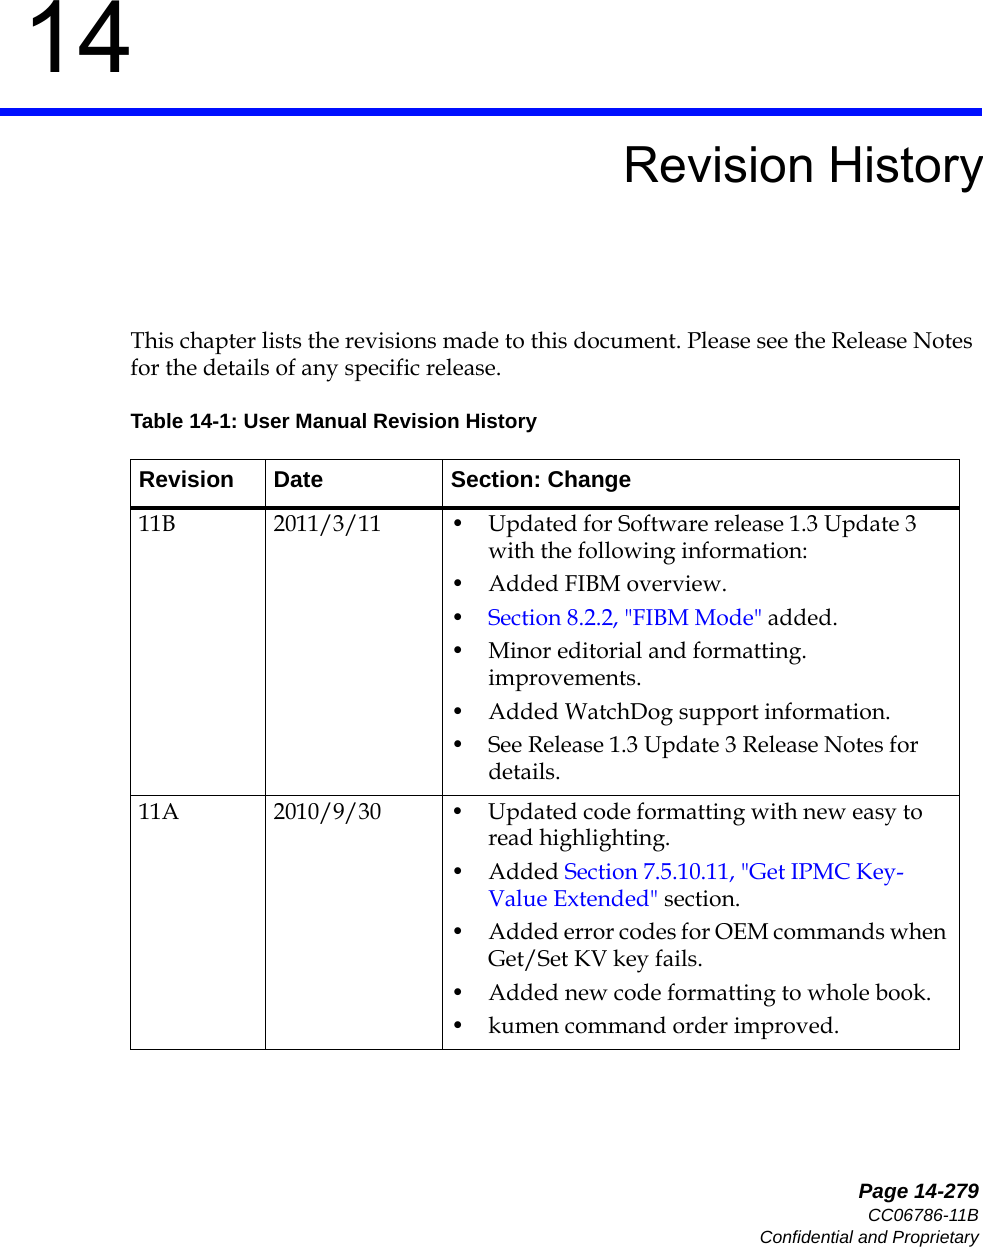   Page 14-279CC06786-11BConfidential and Proprietary14Preliminary14Revision HistoryThis chapter lists the revisions made to this document. Please see the Release Notes for the details of any specific release.Table 14-1: User Manual Revision HistoryRevision Date Section: Change11B 2011/3/11 • Updated for Software release 1.3 Update 3 with the following information:• Added FIBM overview. •Section8.2.2, &quot;FIBM Mode&quot; added.• Minor editorial and formatting. improvements.• Added WatchDog support information.• See Release 1.3 Update 3 Release Notes for details. 11A 2010/9/30 • Updated code formatting with new easy to read highlighting.• Added Section7.5.10.11, &quot;Get IPMC Key-Value Extended&quot; section. • Added error codes for OEM commands when Get/Set KV key fails.• Added new code formatting to whole book.• kumen command order improved.